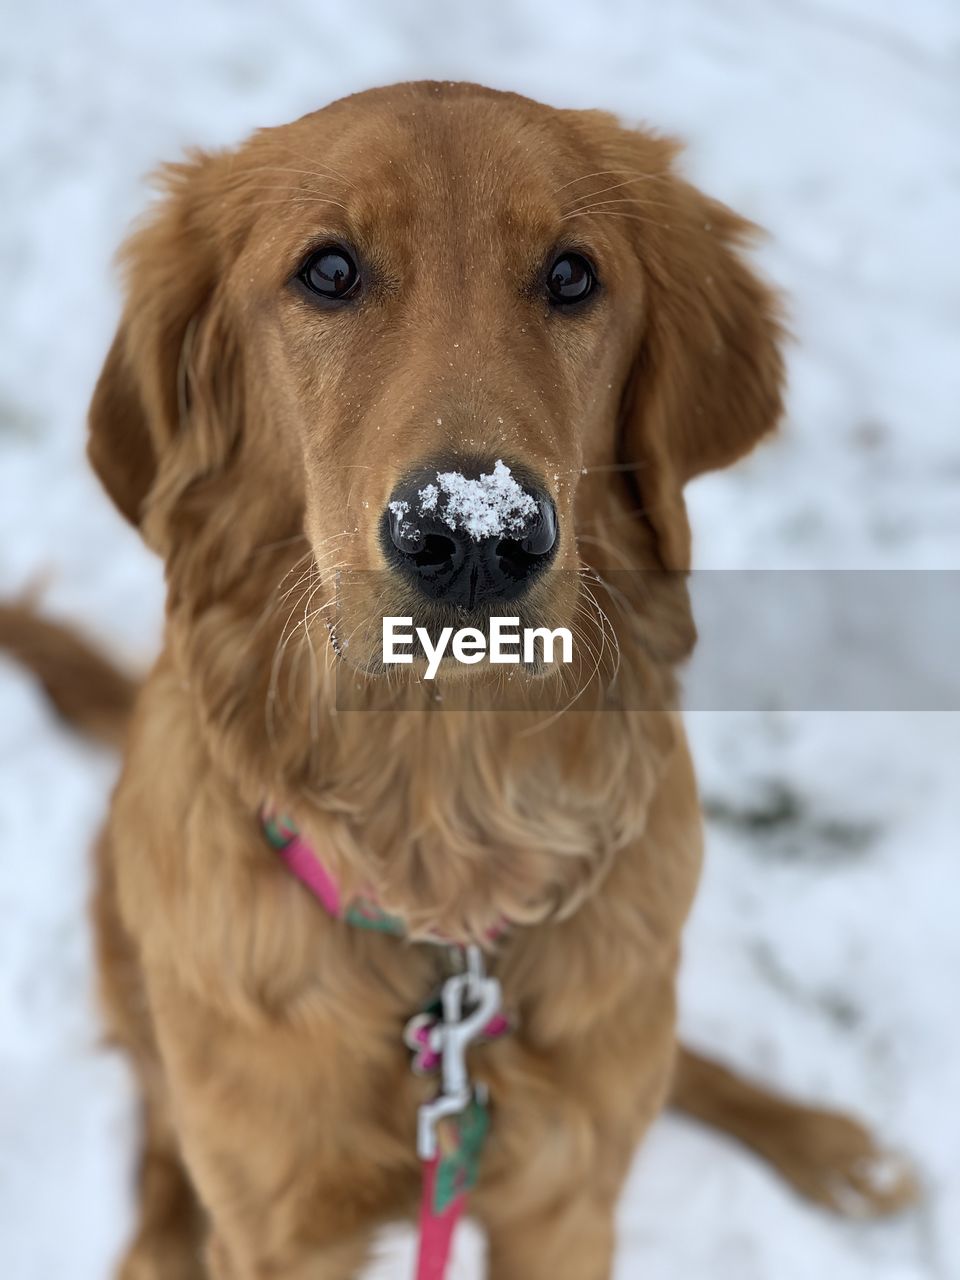 CLOSE-UP PORTRAIT OF A DOG ON SNOW